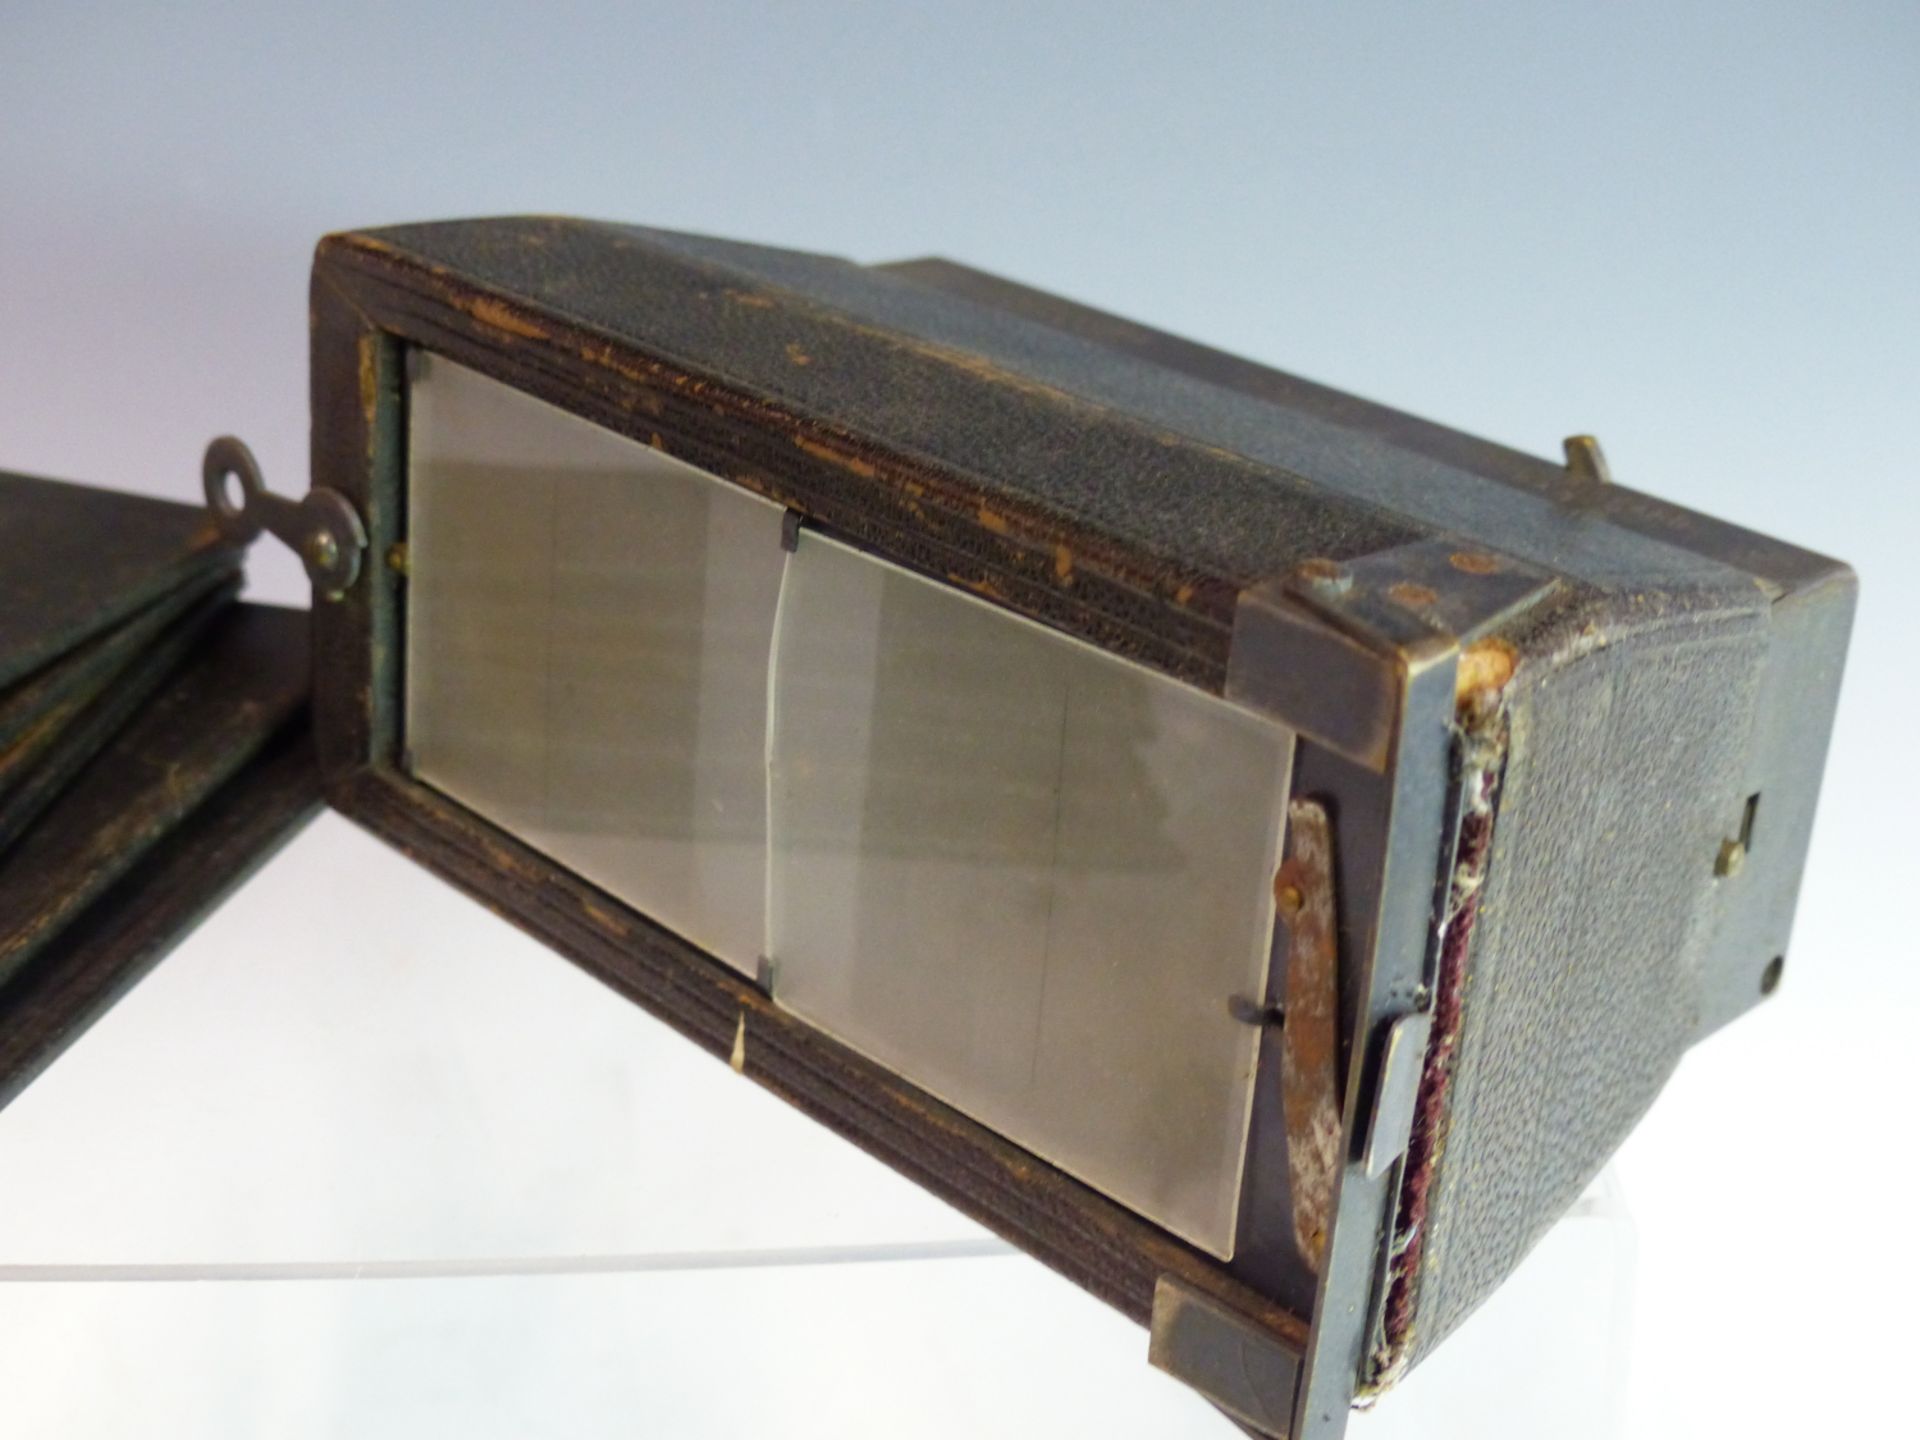 A RARE FRENCH GLYPHOSCOPE STEREOSCOPIC CAMERA BY JULES RICHARD, PARIS. IN ITS ORIGINAL POUCH WITH - Image 4 of 4